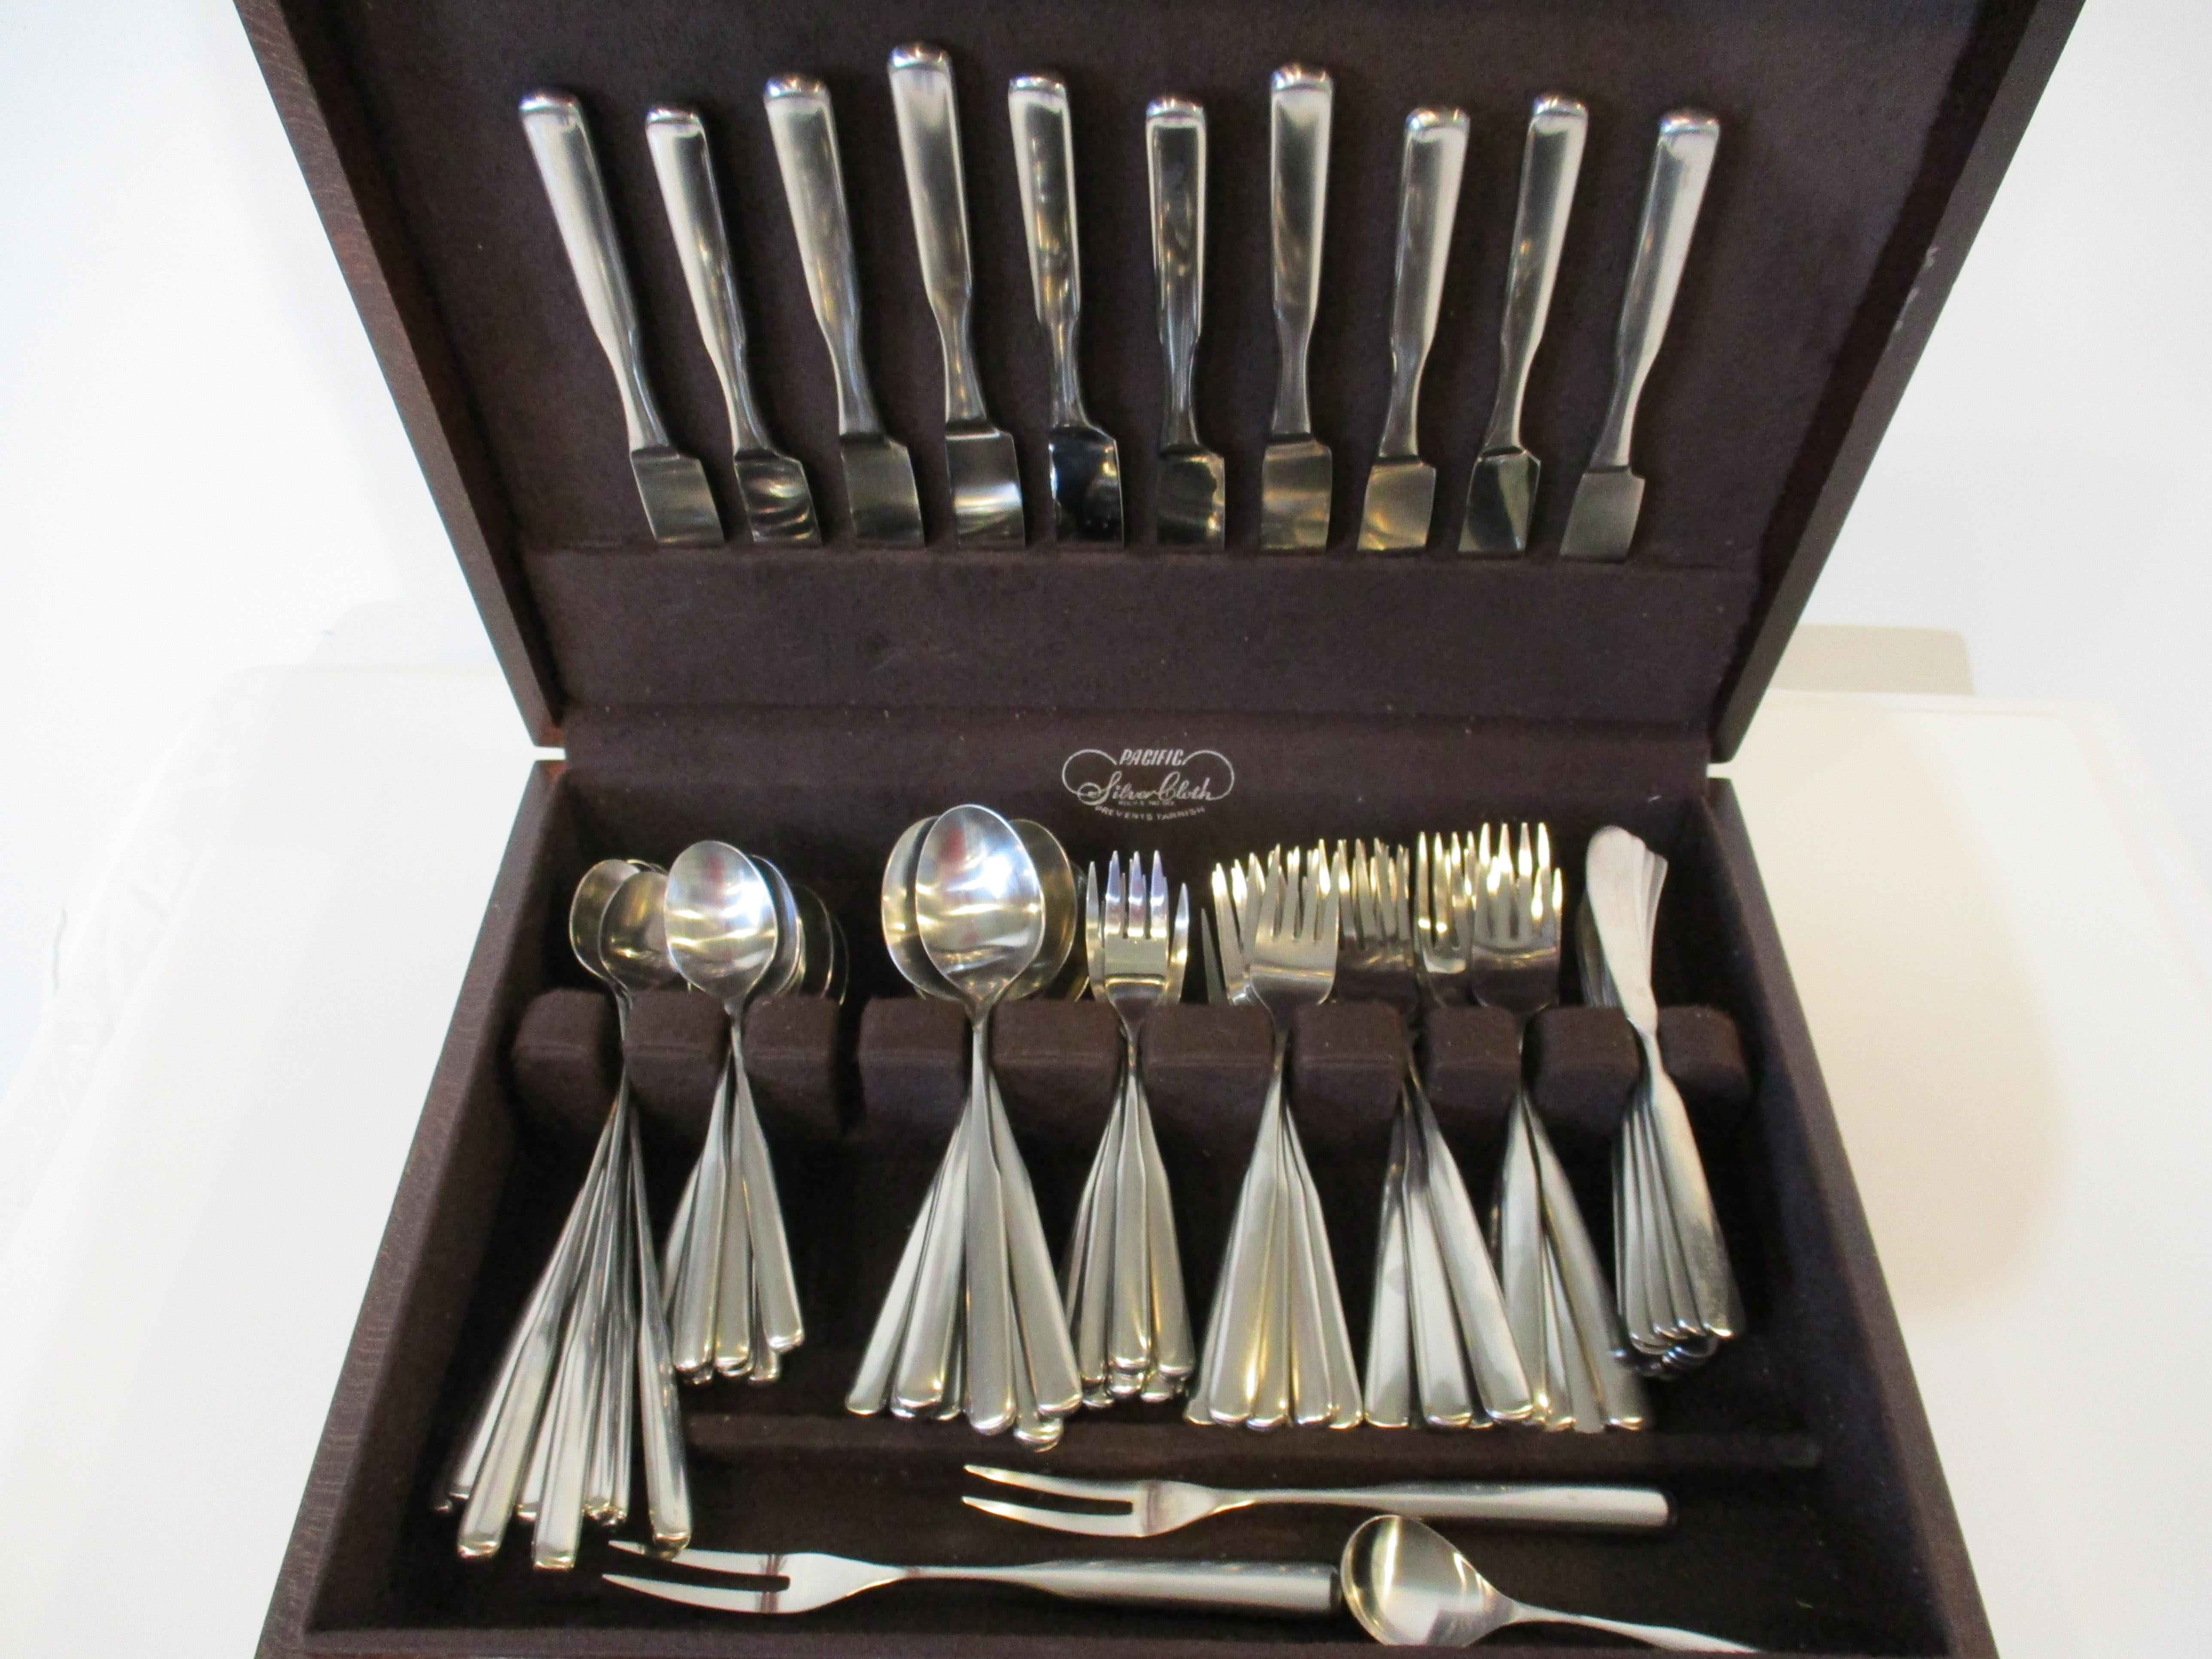 A 83 piece mid century stainless steel flatware set with 10 place settings of eight pieces including 10 large forks, 10 salad forks, 10 dinner knifes, 10 butter knifes, 10 long ice tea spoons, 10 tea spoons. 10 soup spoons and 10 desert forks. Also